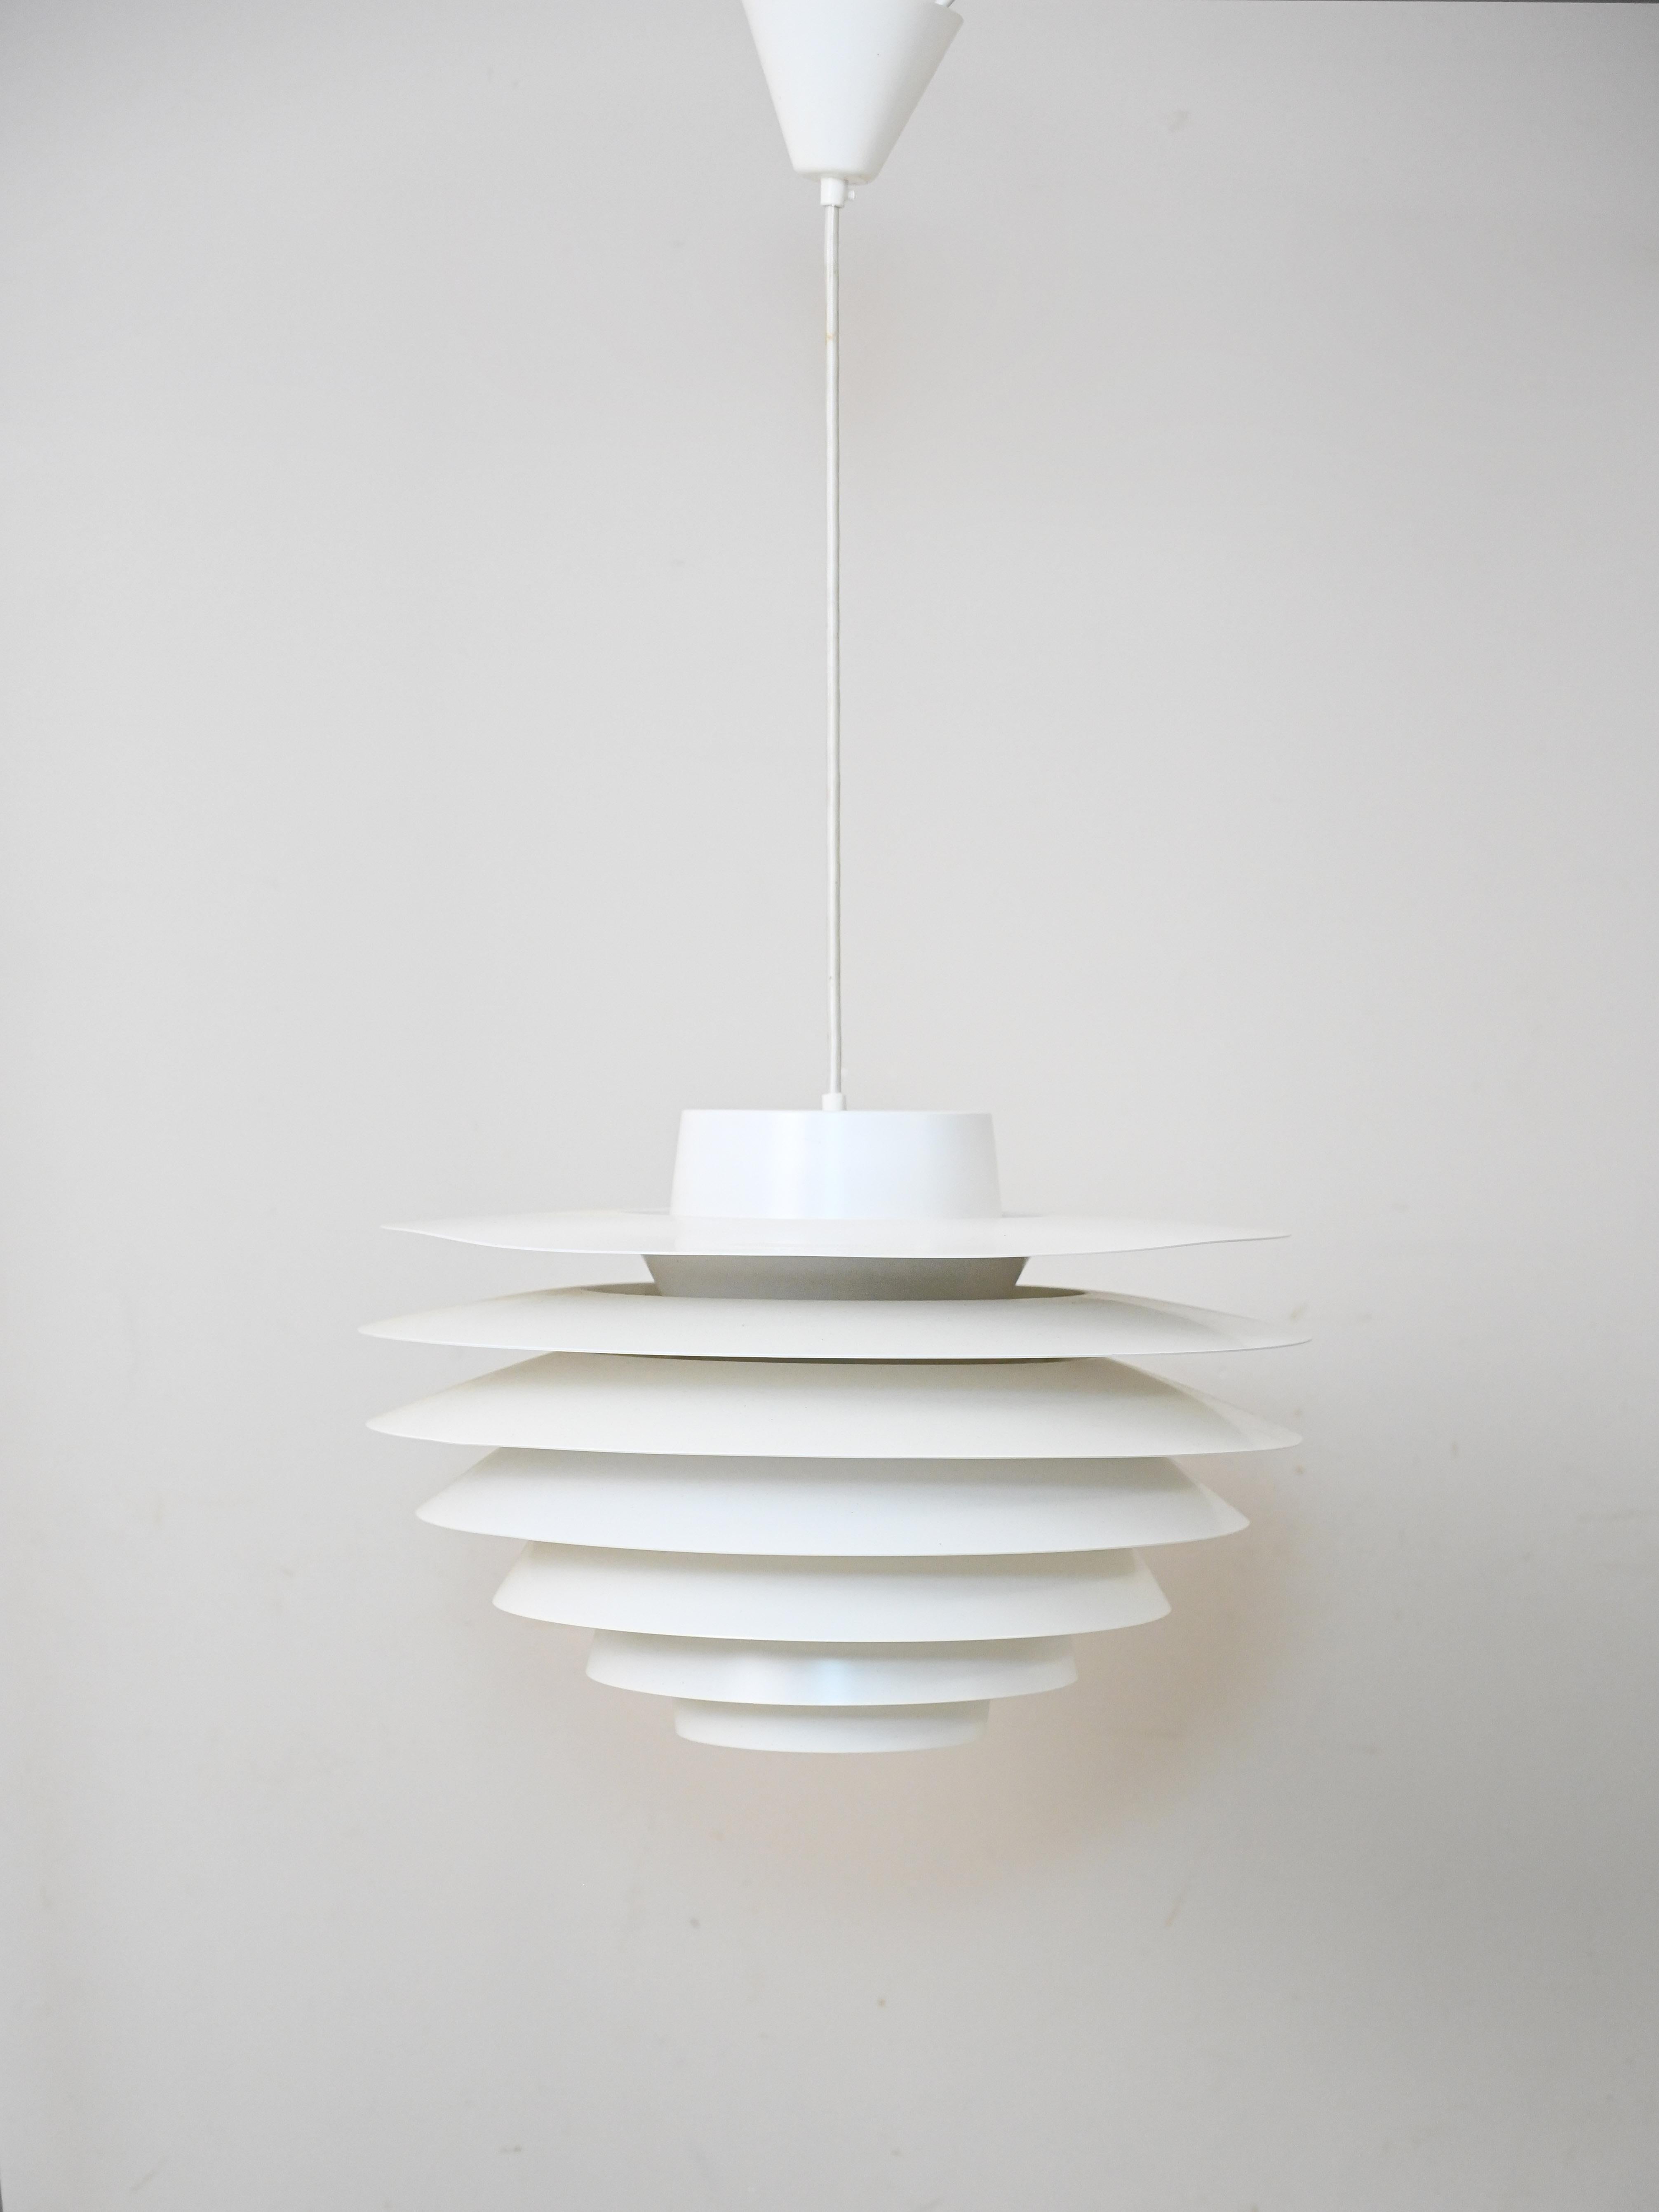 Pendant lamp model 'Verona' by Svend Middelboe for Fog & Mørup, Denmark, 1970s.

Made of white enameled aluminum this lamp consists of five rings arranged so that the light is dispersed evenly over the surface.
Its structure thus makes it